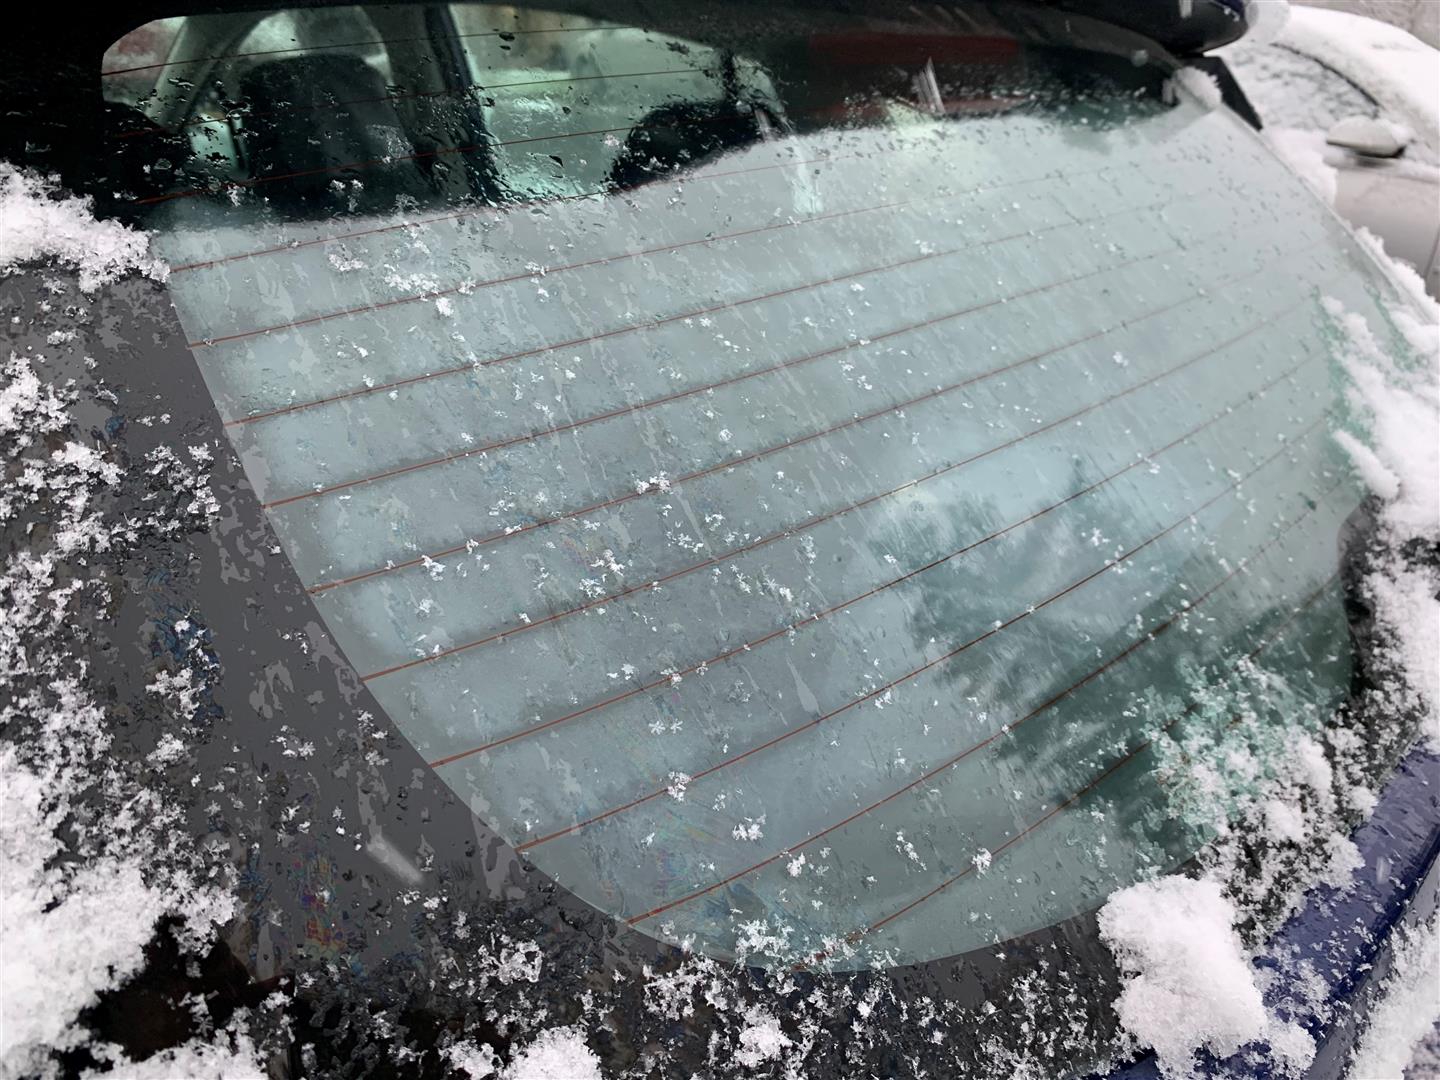 Why Won't My Rear Defroster Work? - Lou's Car Care & Fleet Services